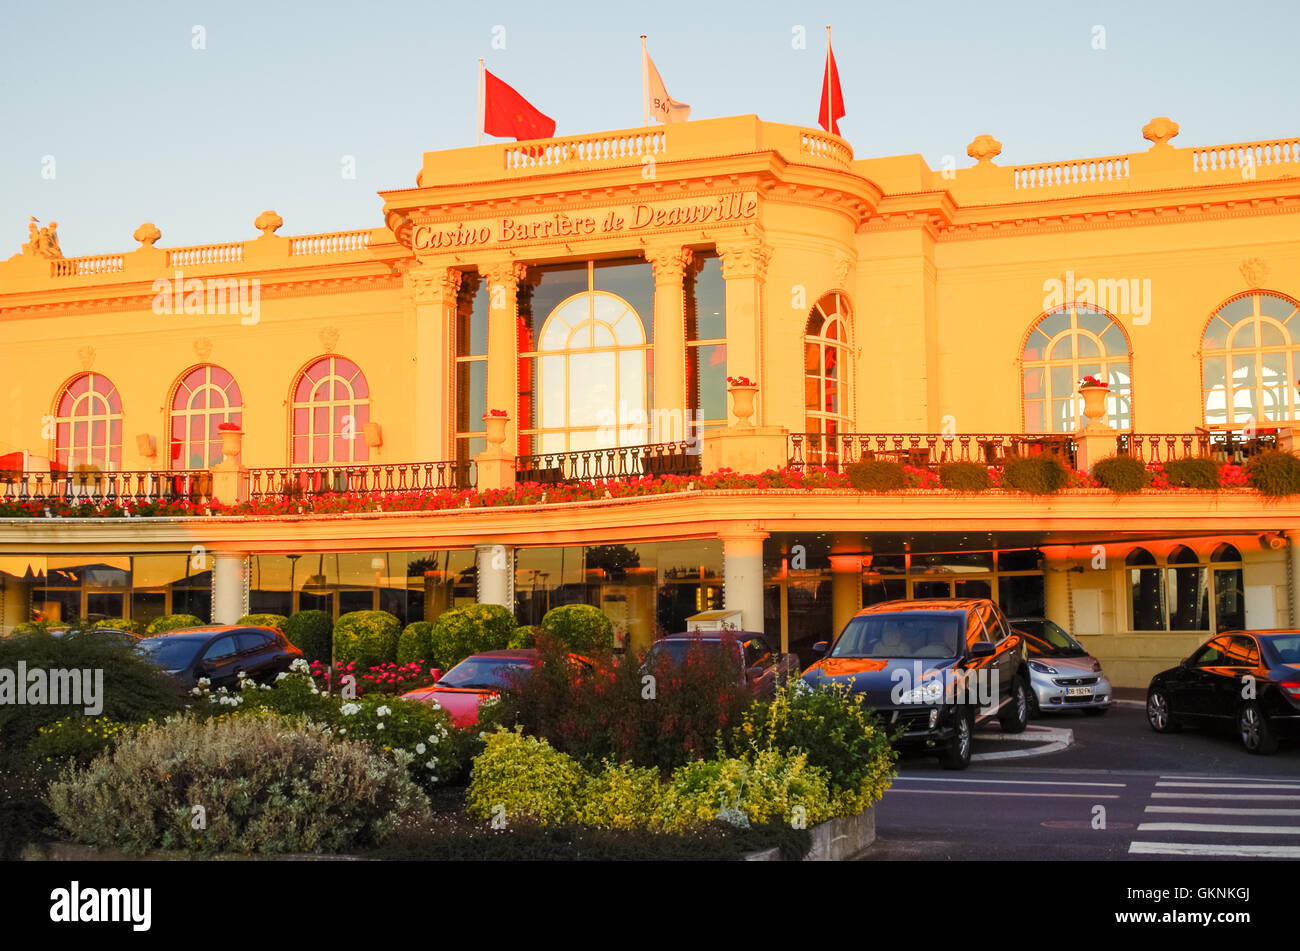 Facade of the Casino Barrière in Deauville in the warm light of the golden hour Stock Photo